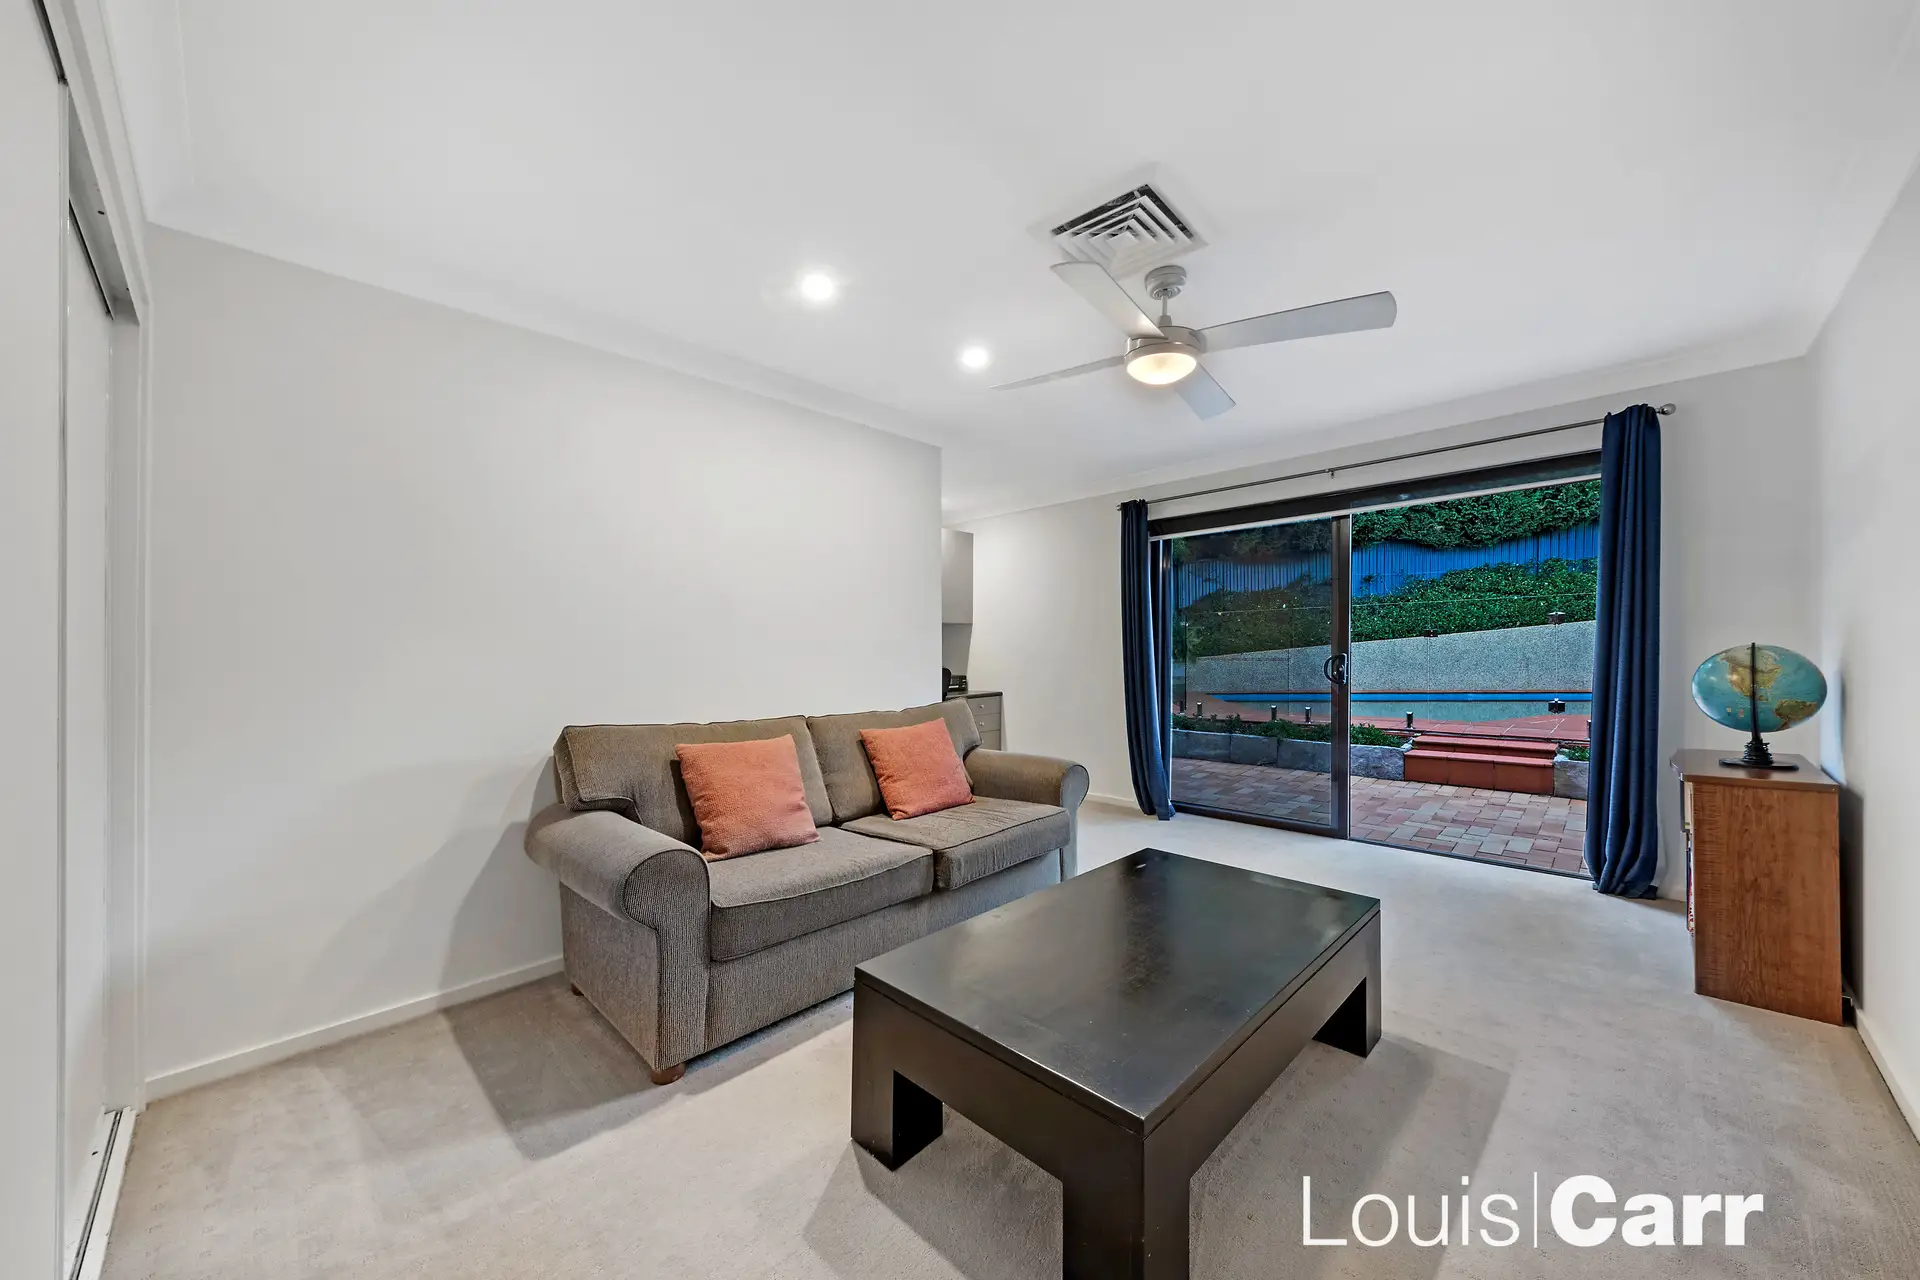 Photo #12: 53 Carinda Drive, Glenhaven - Sold by Louis Carr Real Estate